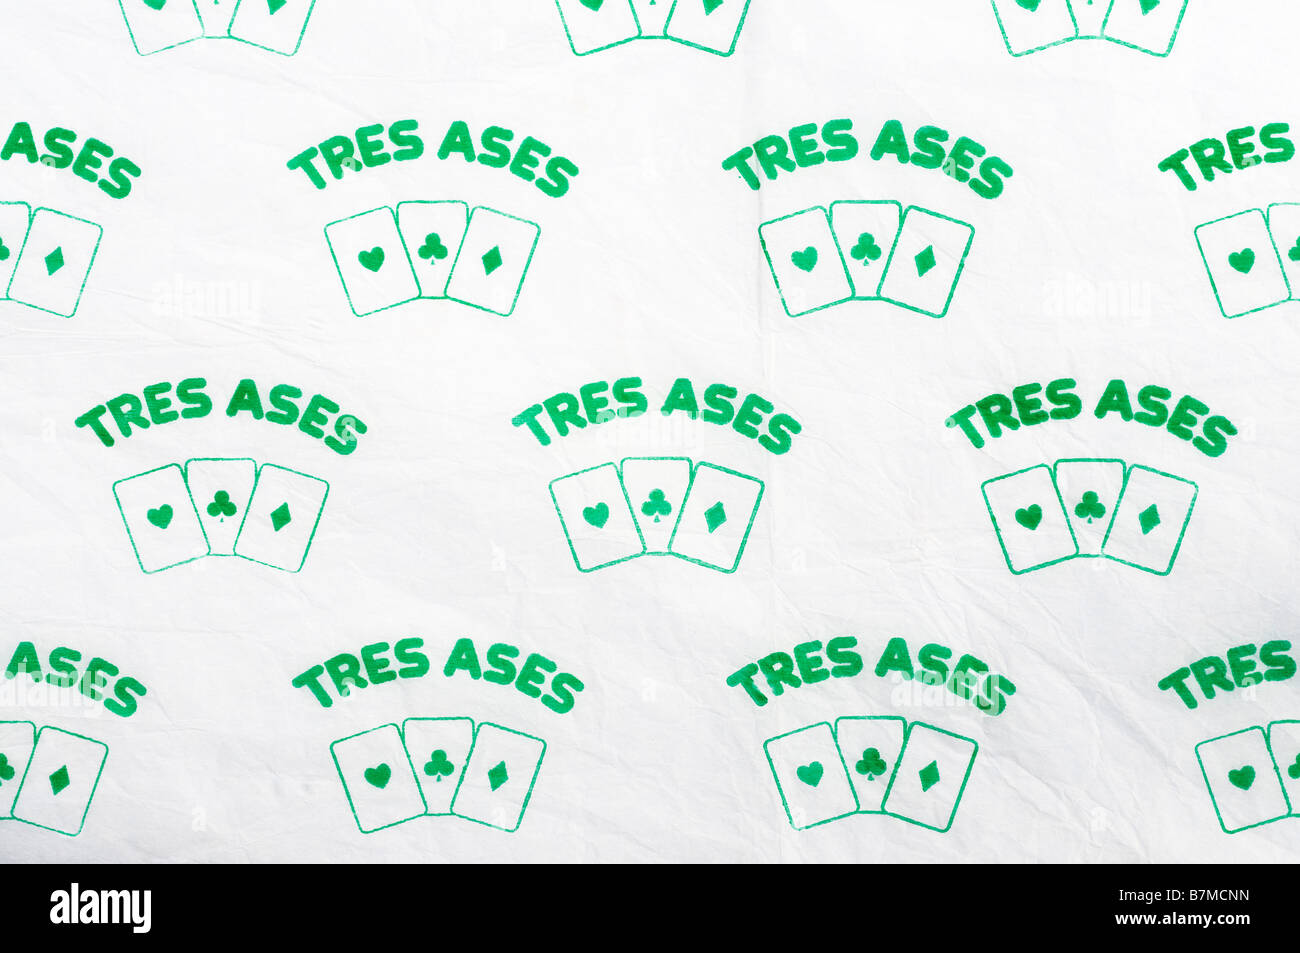 Printed ephemera / Citrus fruit wrapper from Spain - 3 Aces 'Tres Ases' Playing Cards illustration on tissue paper. Stock Photo